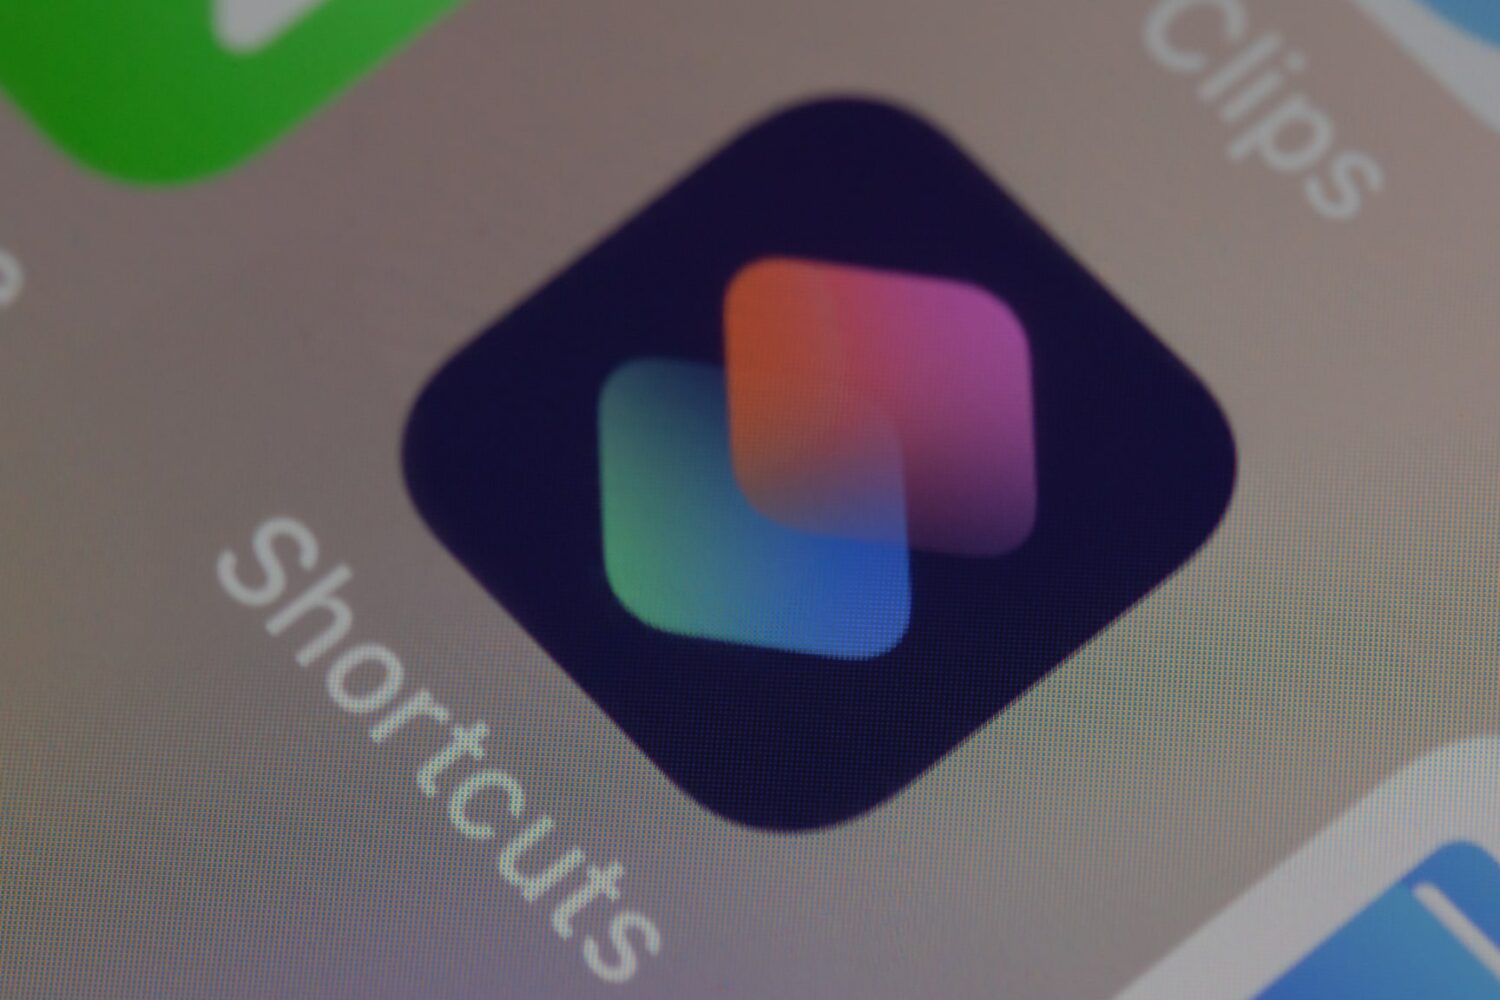 Closeup of the Apple Shortcuts app icon on iOS home screen